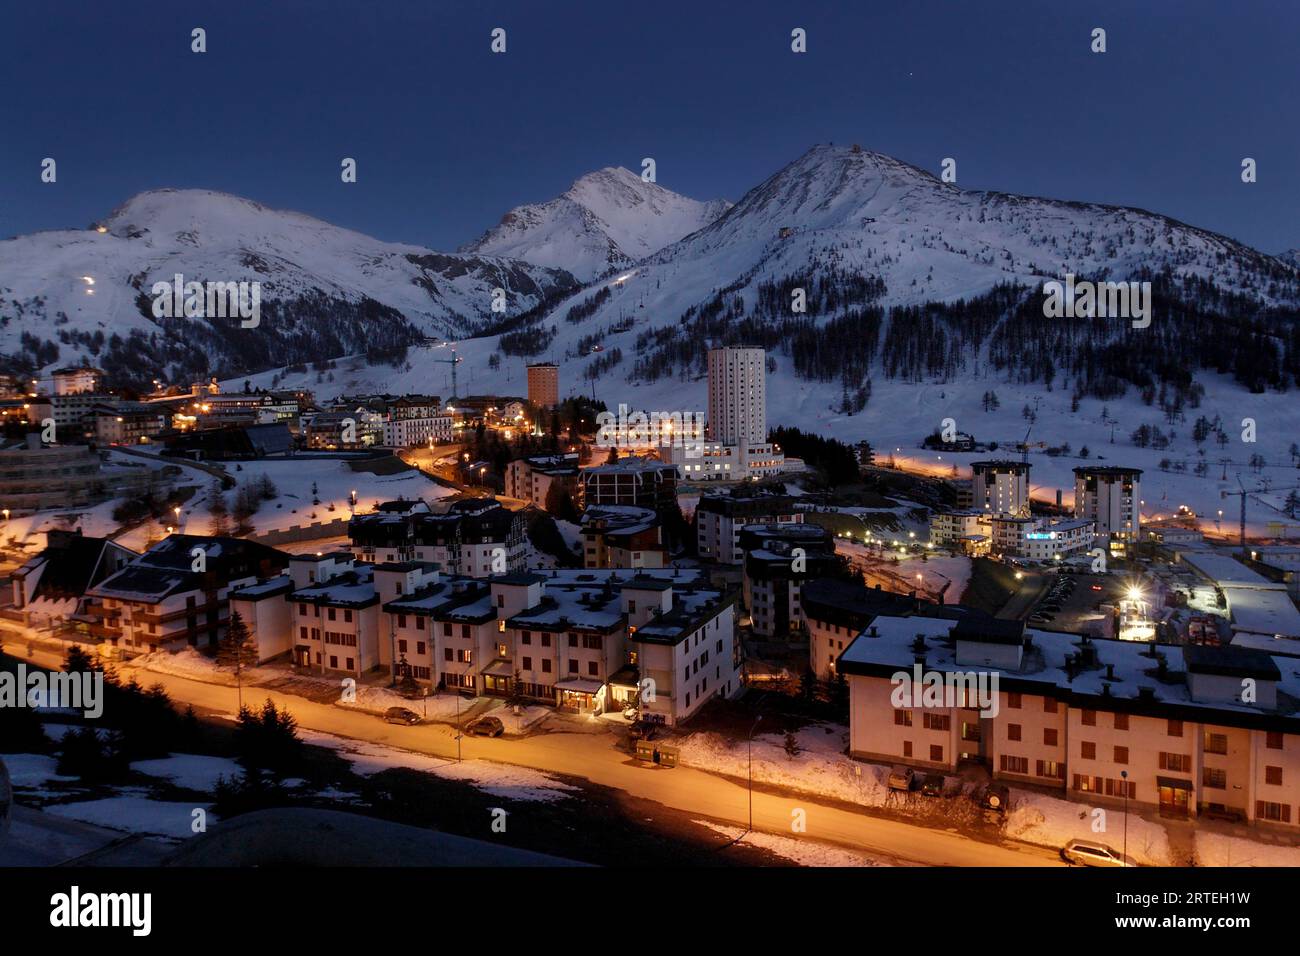 Evening view of the snow-covered resort town of Sestriere, Italy; Sestriere, Italy Stock Photo